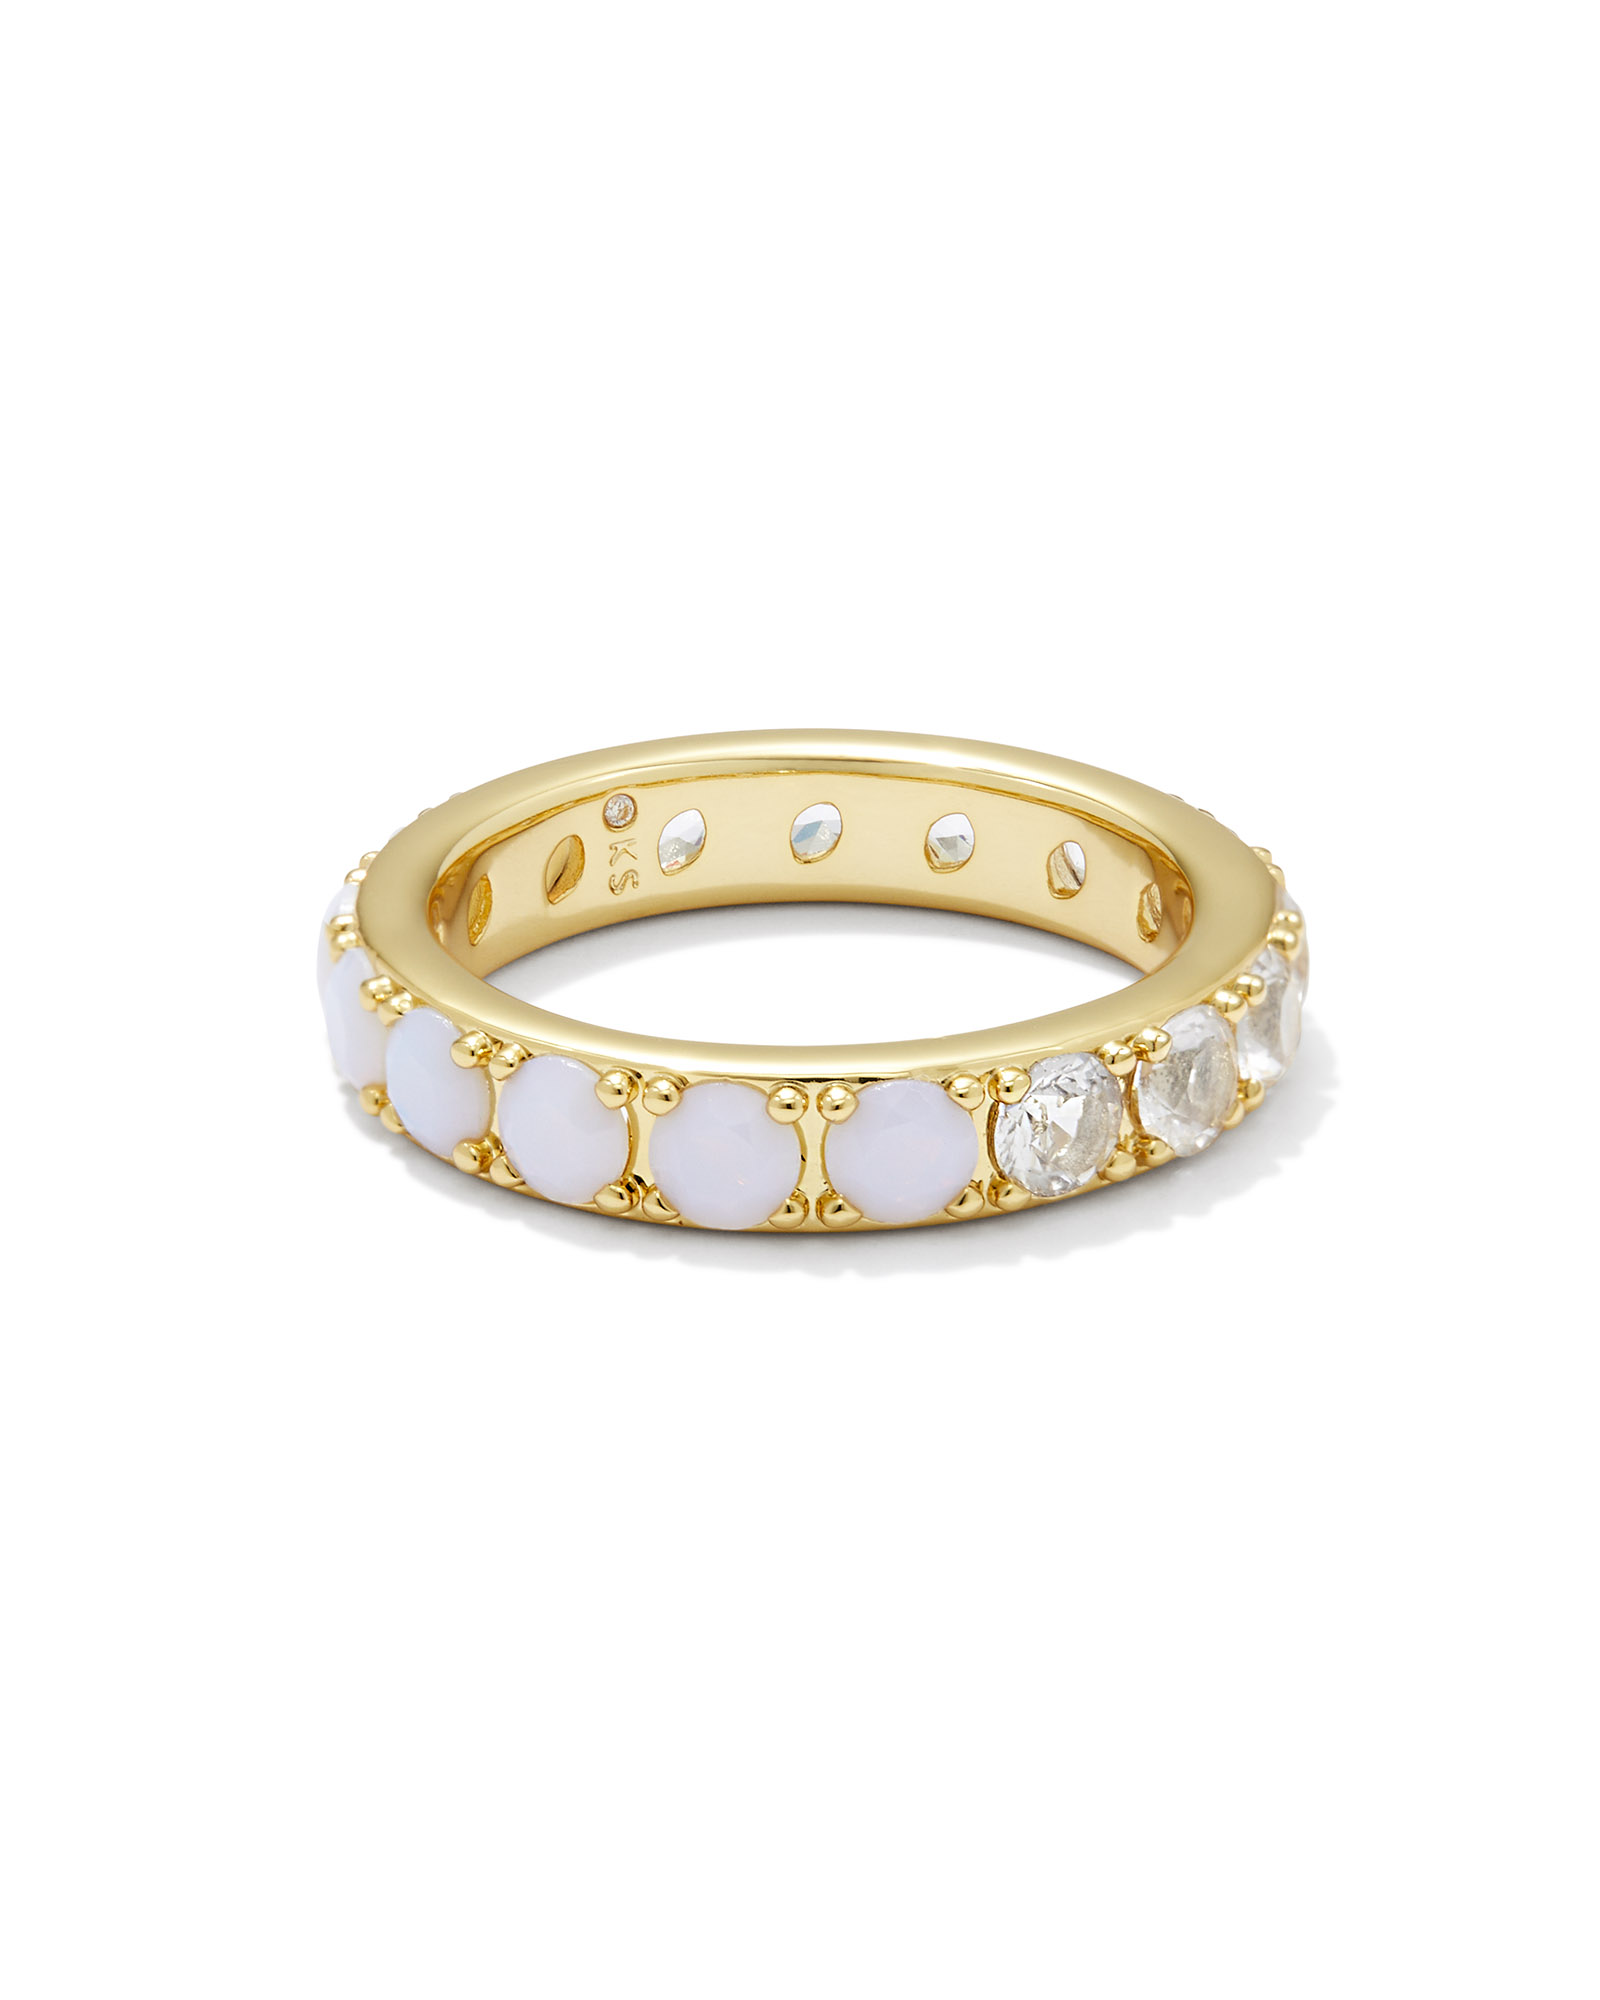 Chandler Gold Band Ring in White Opalite Mix | Kendra Scott